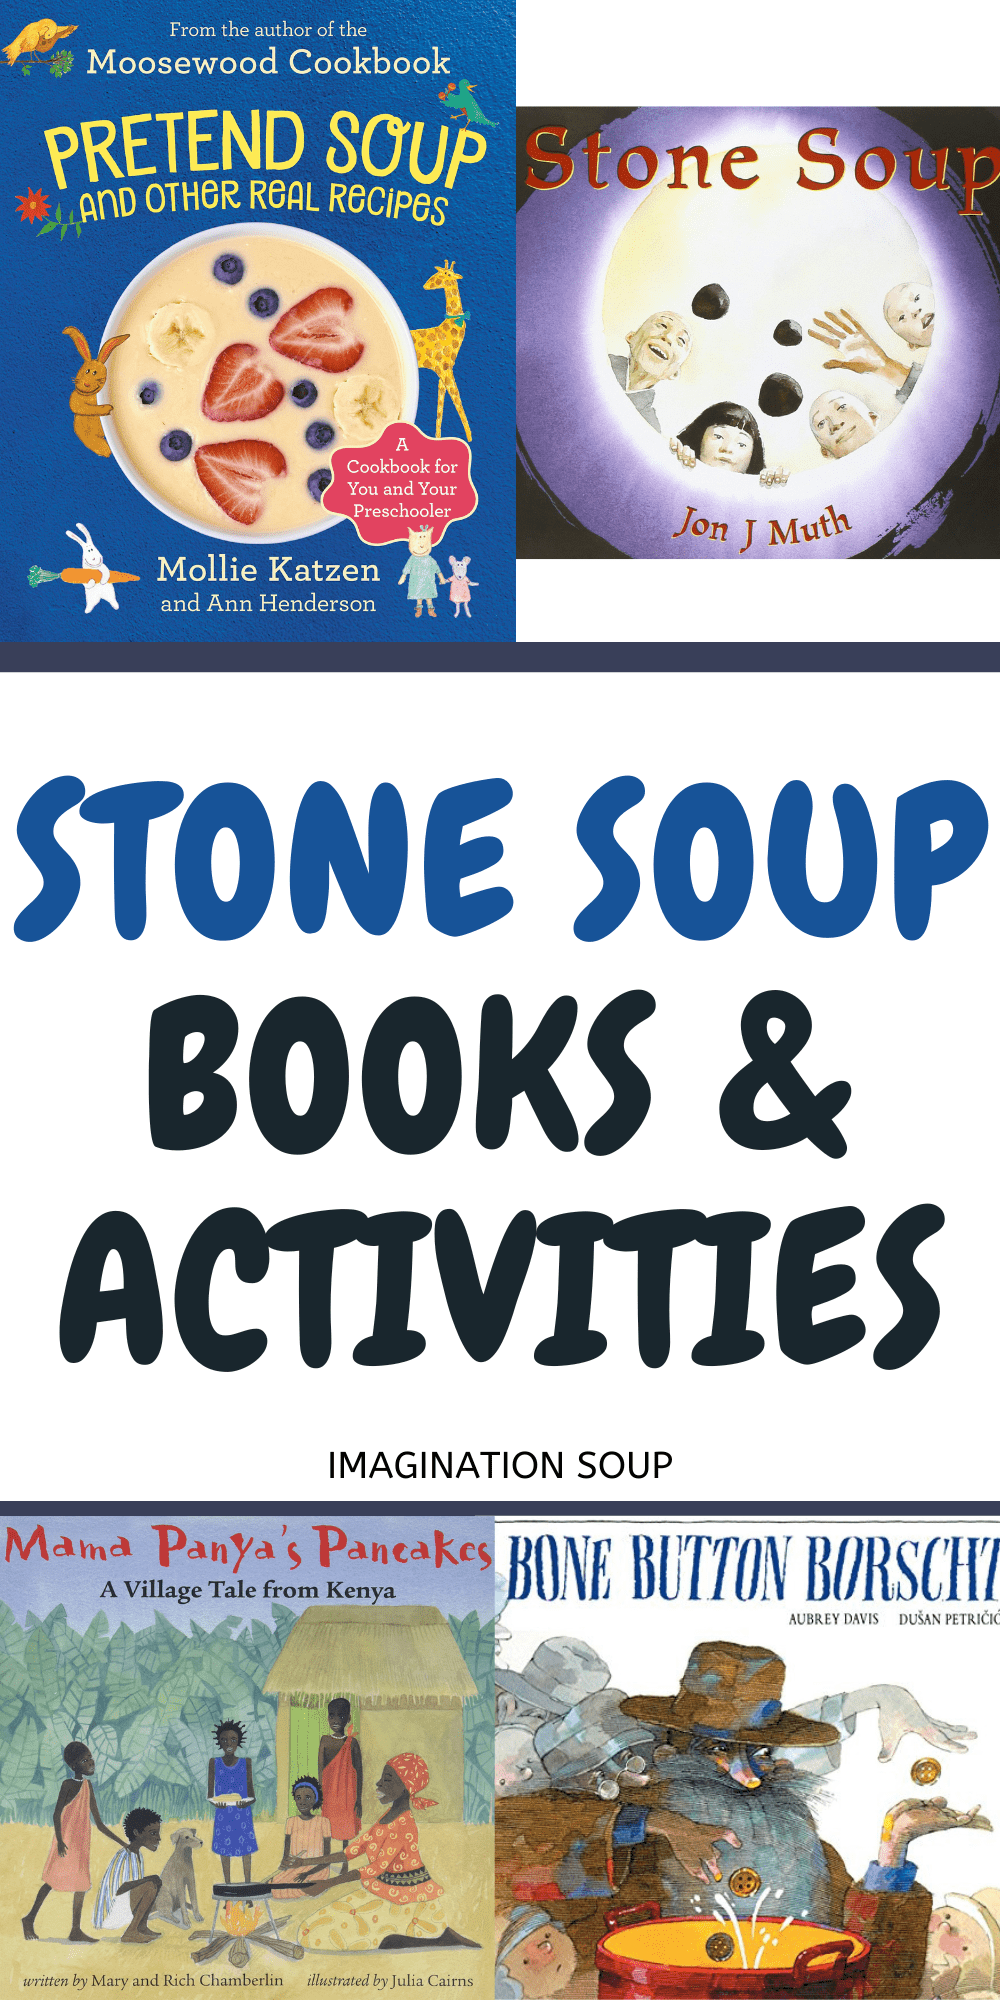 Stone Soup books and activities for kids